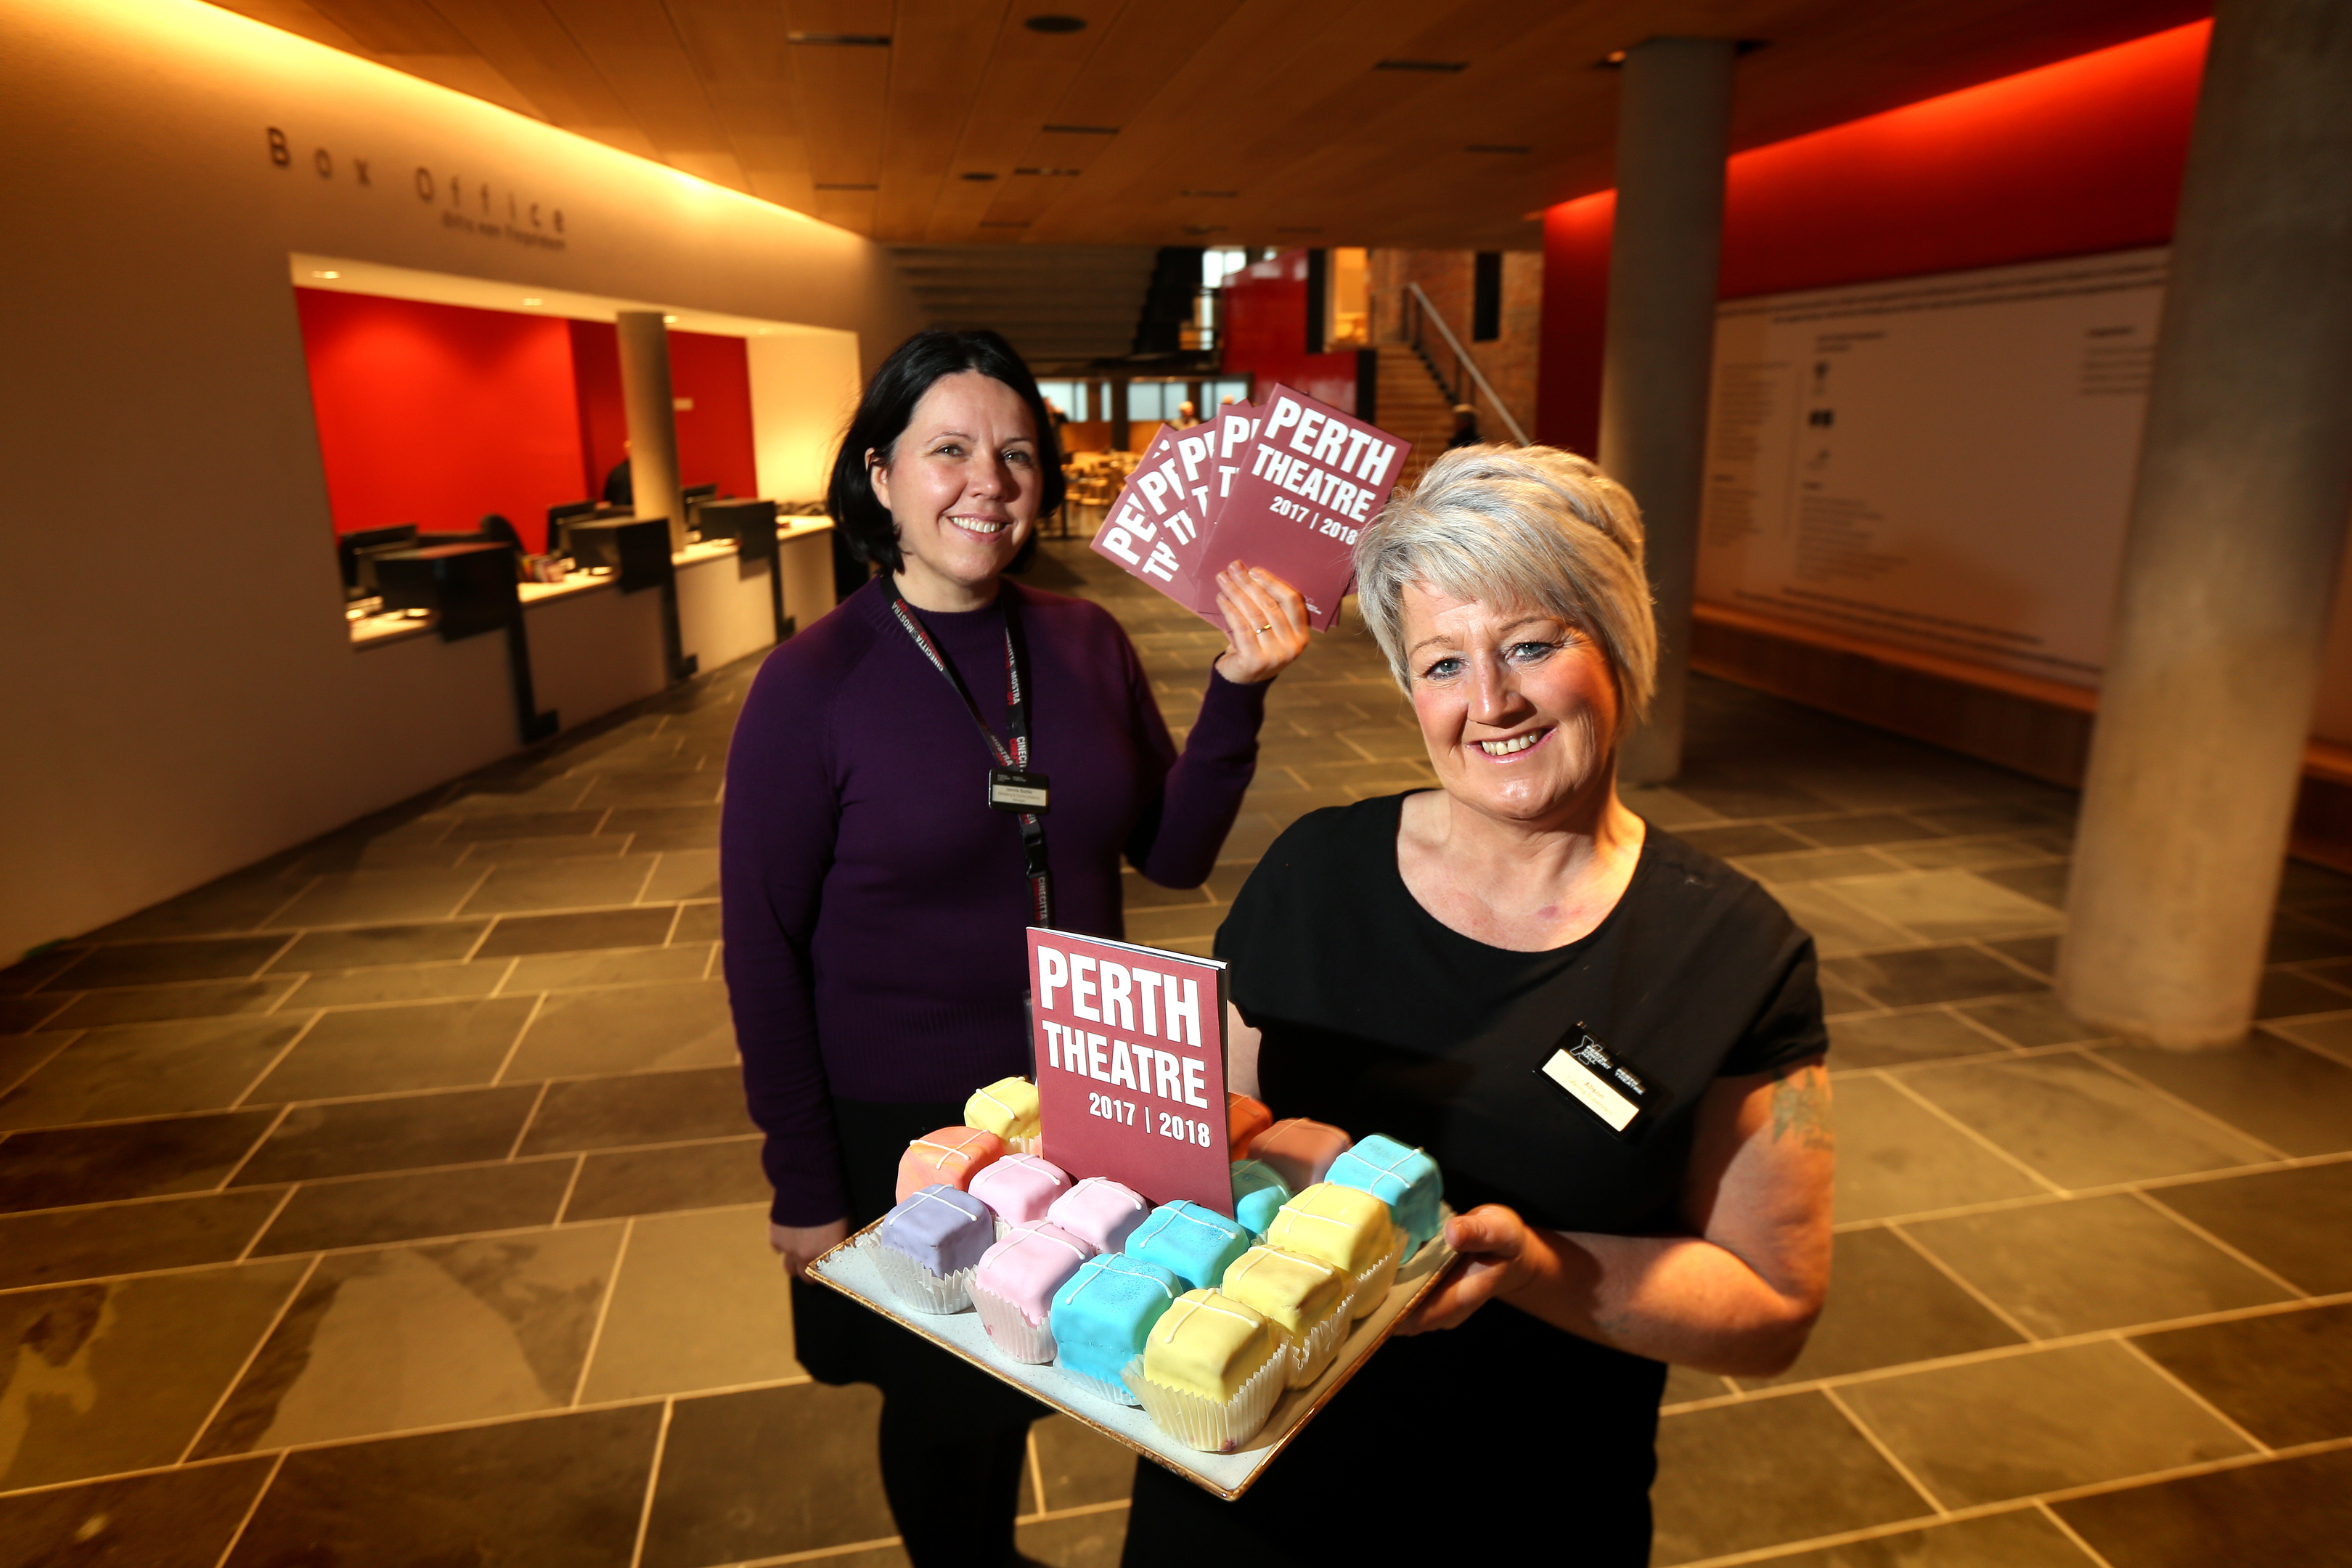 Jennie Baiilie - Marketing Manager and Allison Gormley - Catering Supervisor celebrating Perth Theatre re-opening.